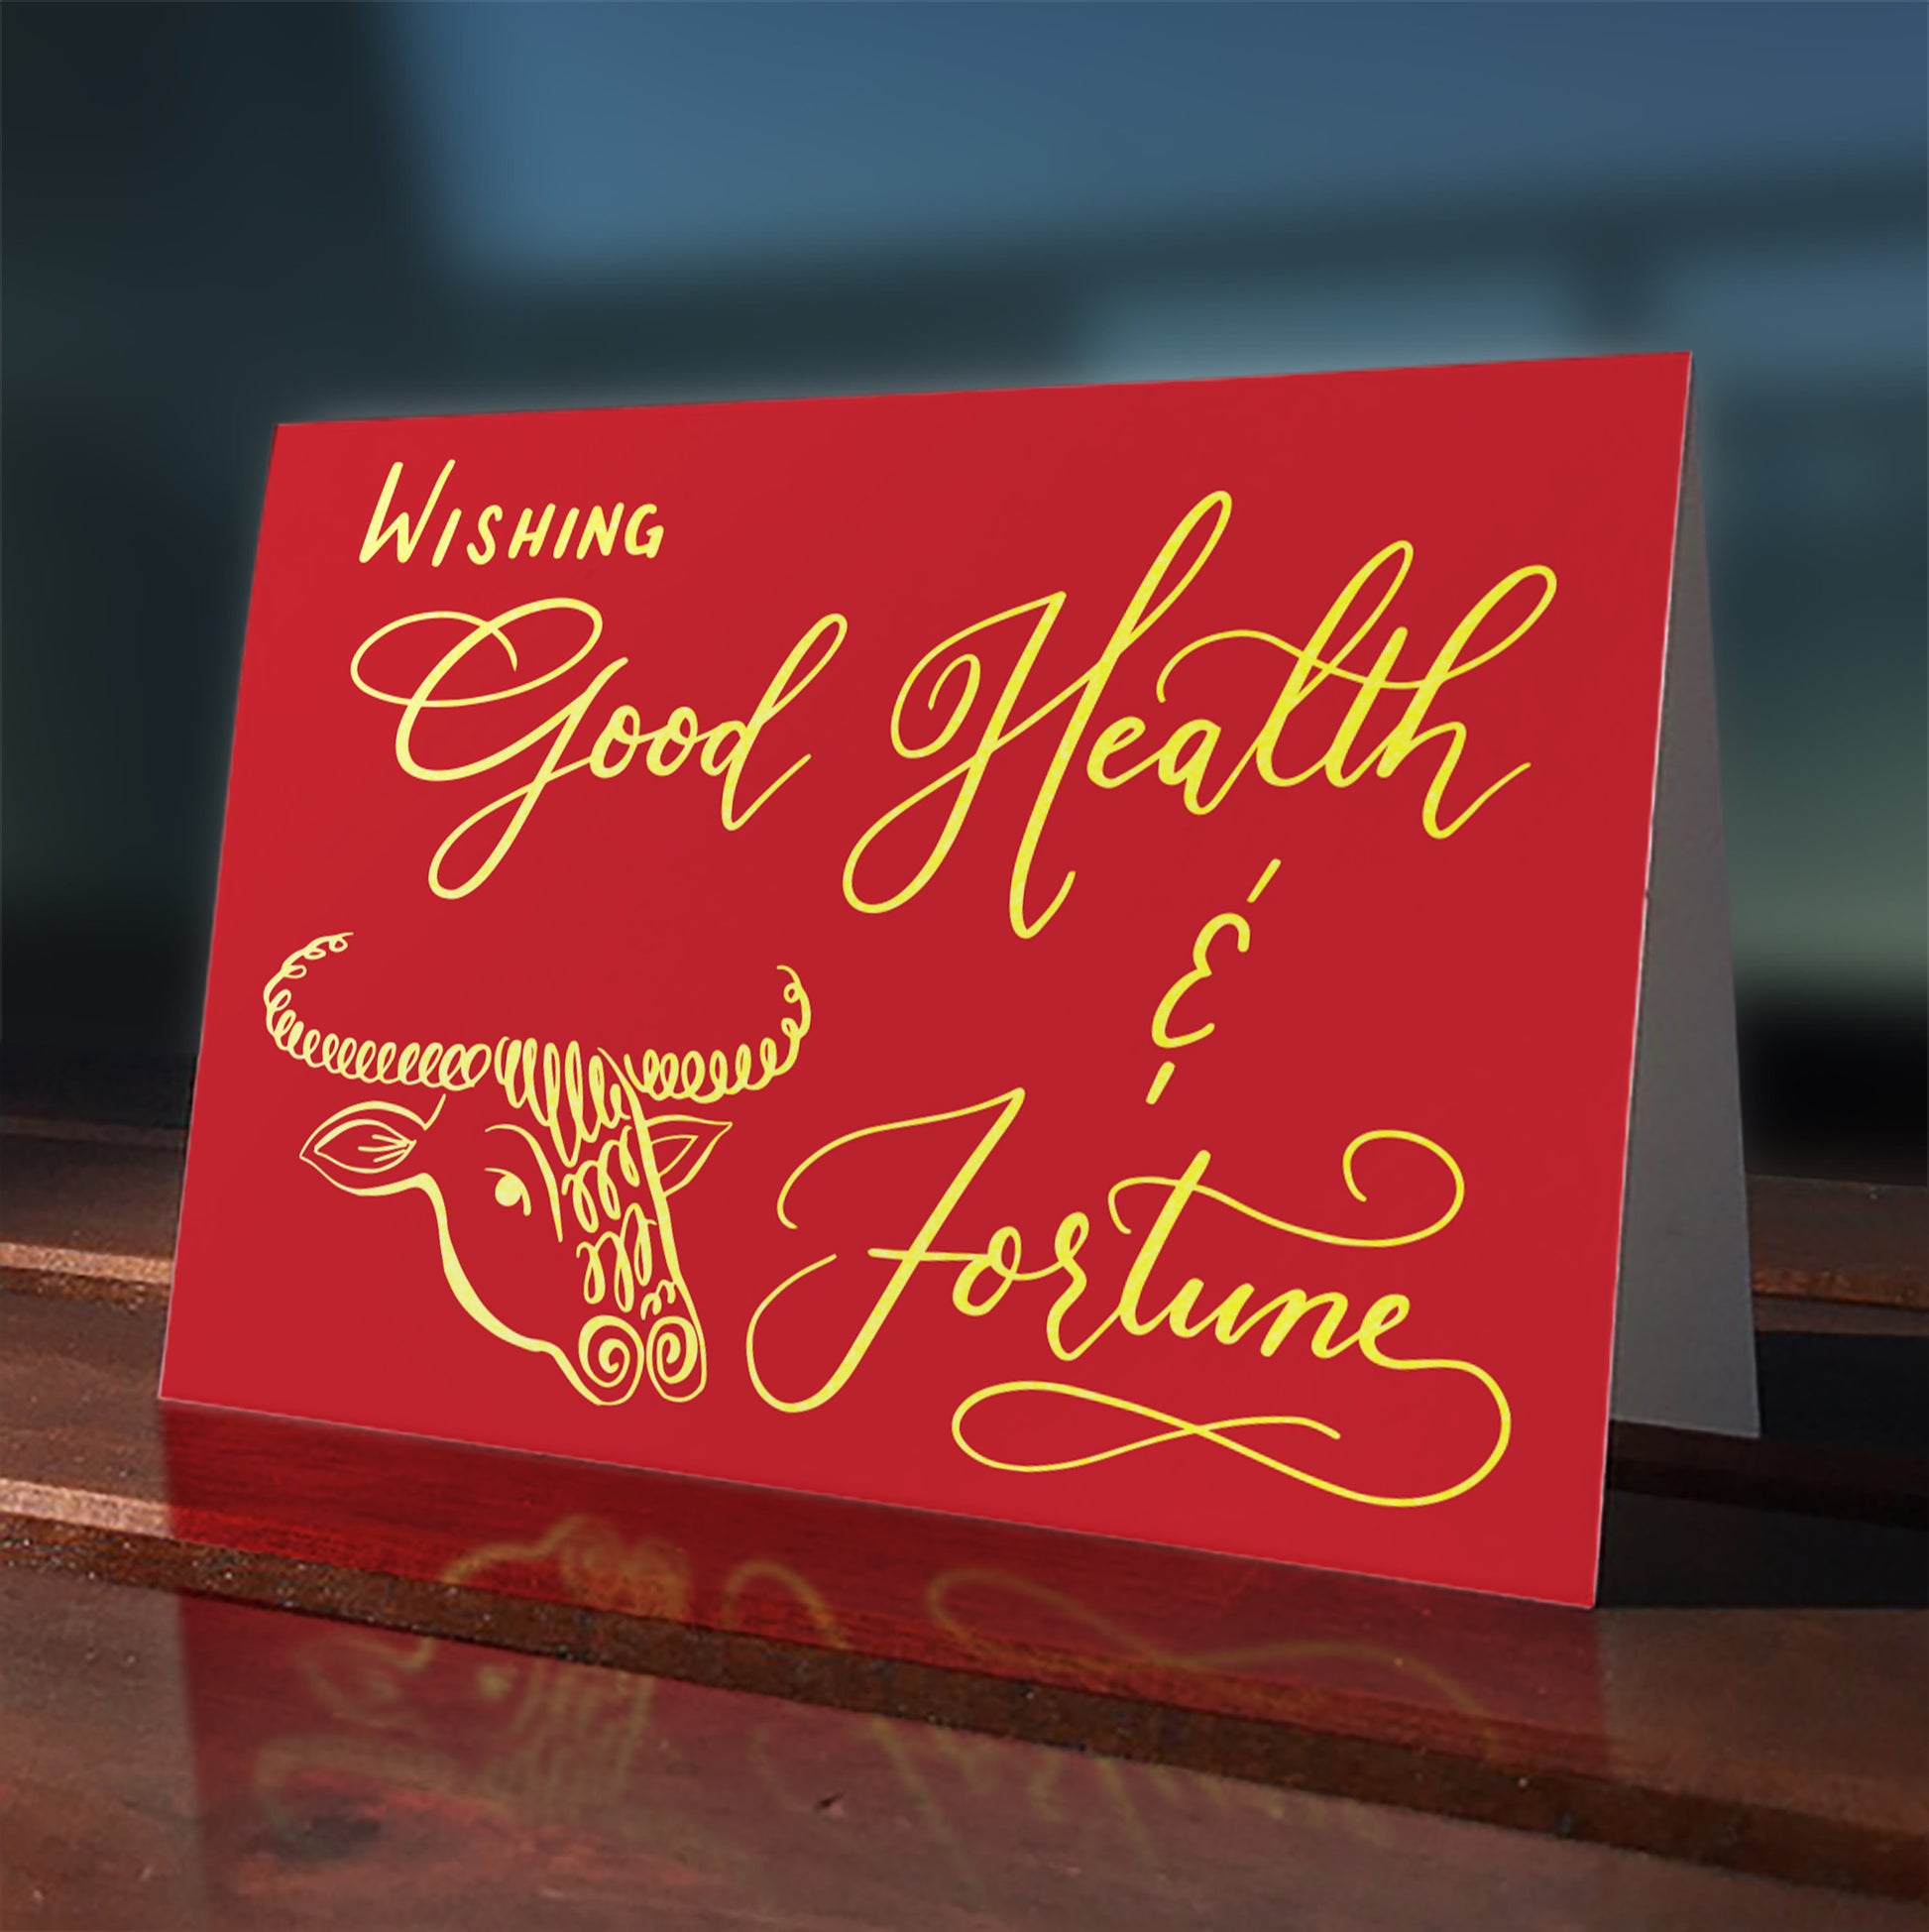 A lifestyle view of the greeting card: "Wishing Good Health & Fortune"